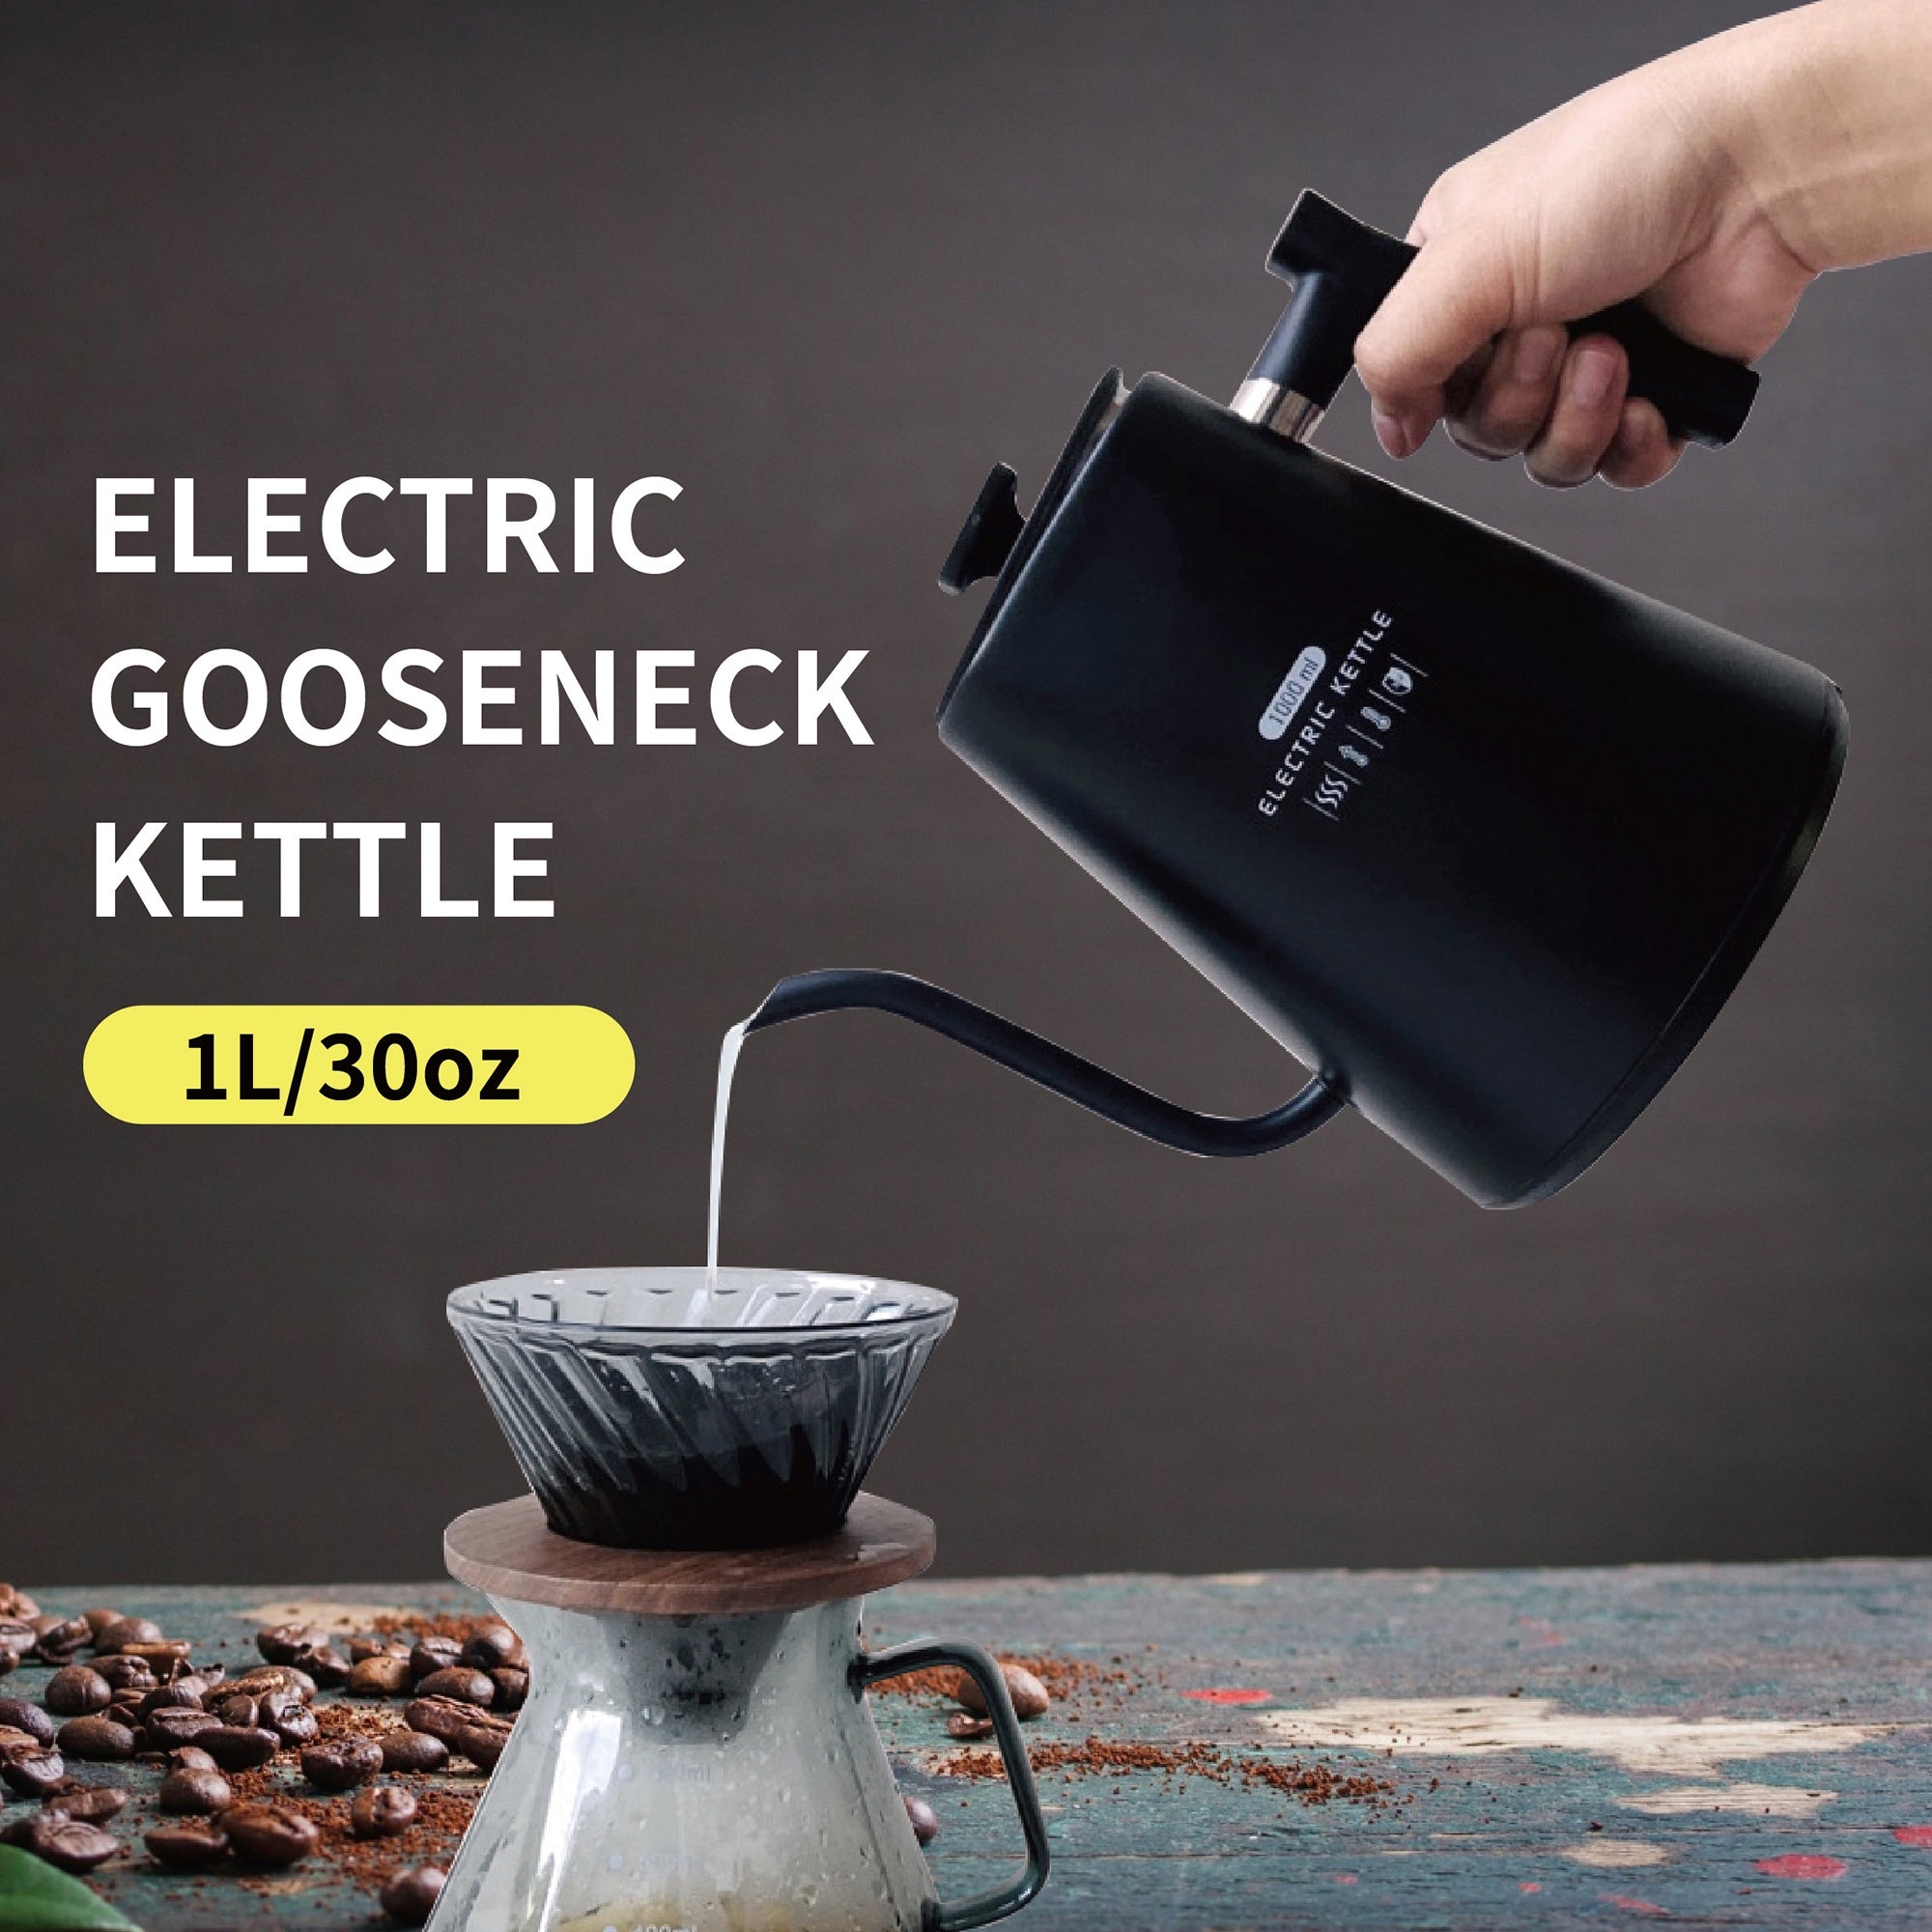 https://ak1.ostkcdn.com/images/products/is/images/direct/64f9b2781dba4168b76d72b9a872fc0592dfe5c7/Black-1L-Stainless-Steel-Gooseneck-Electric-Kettle.jpg